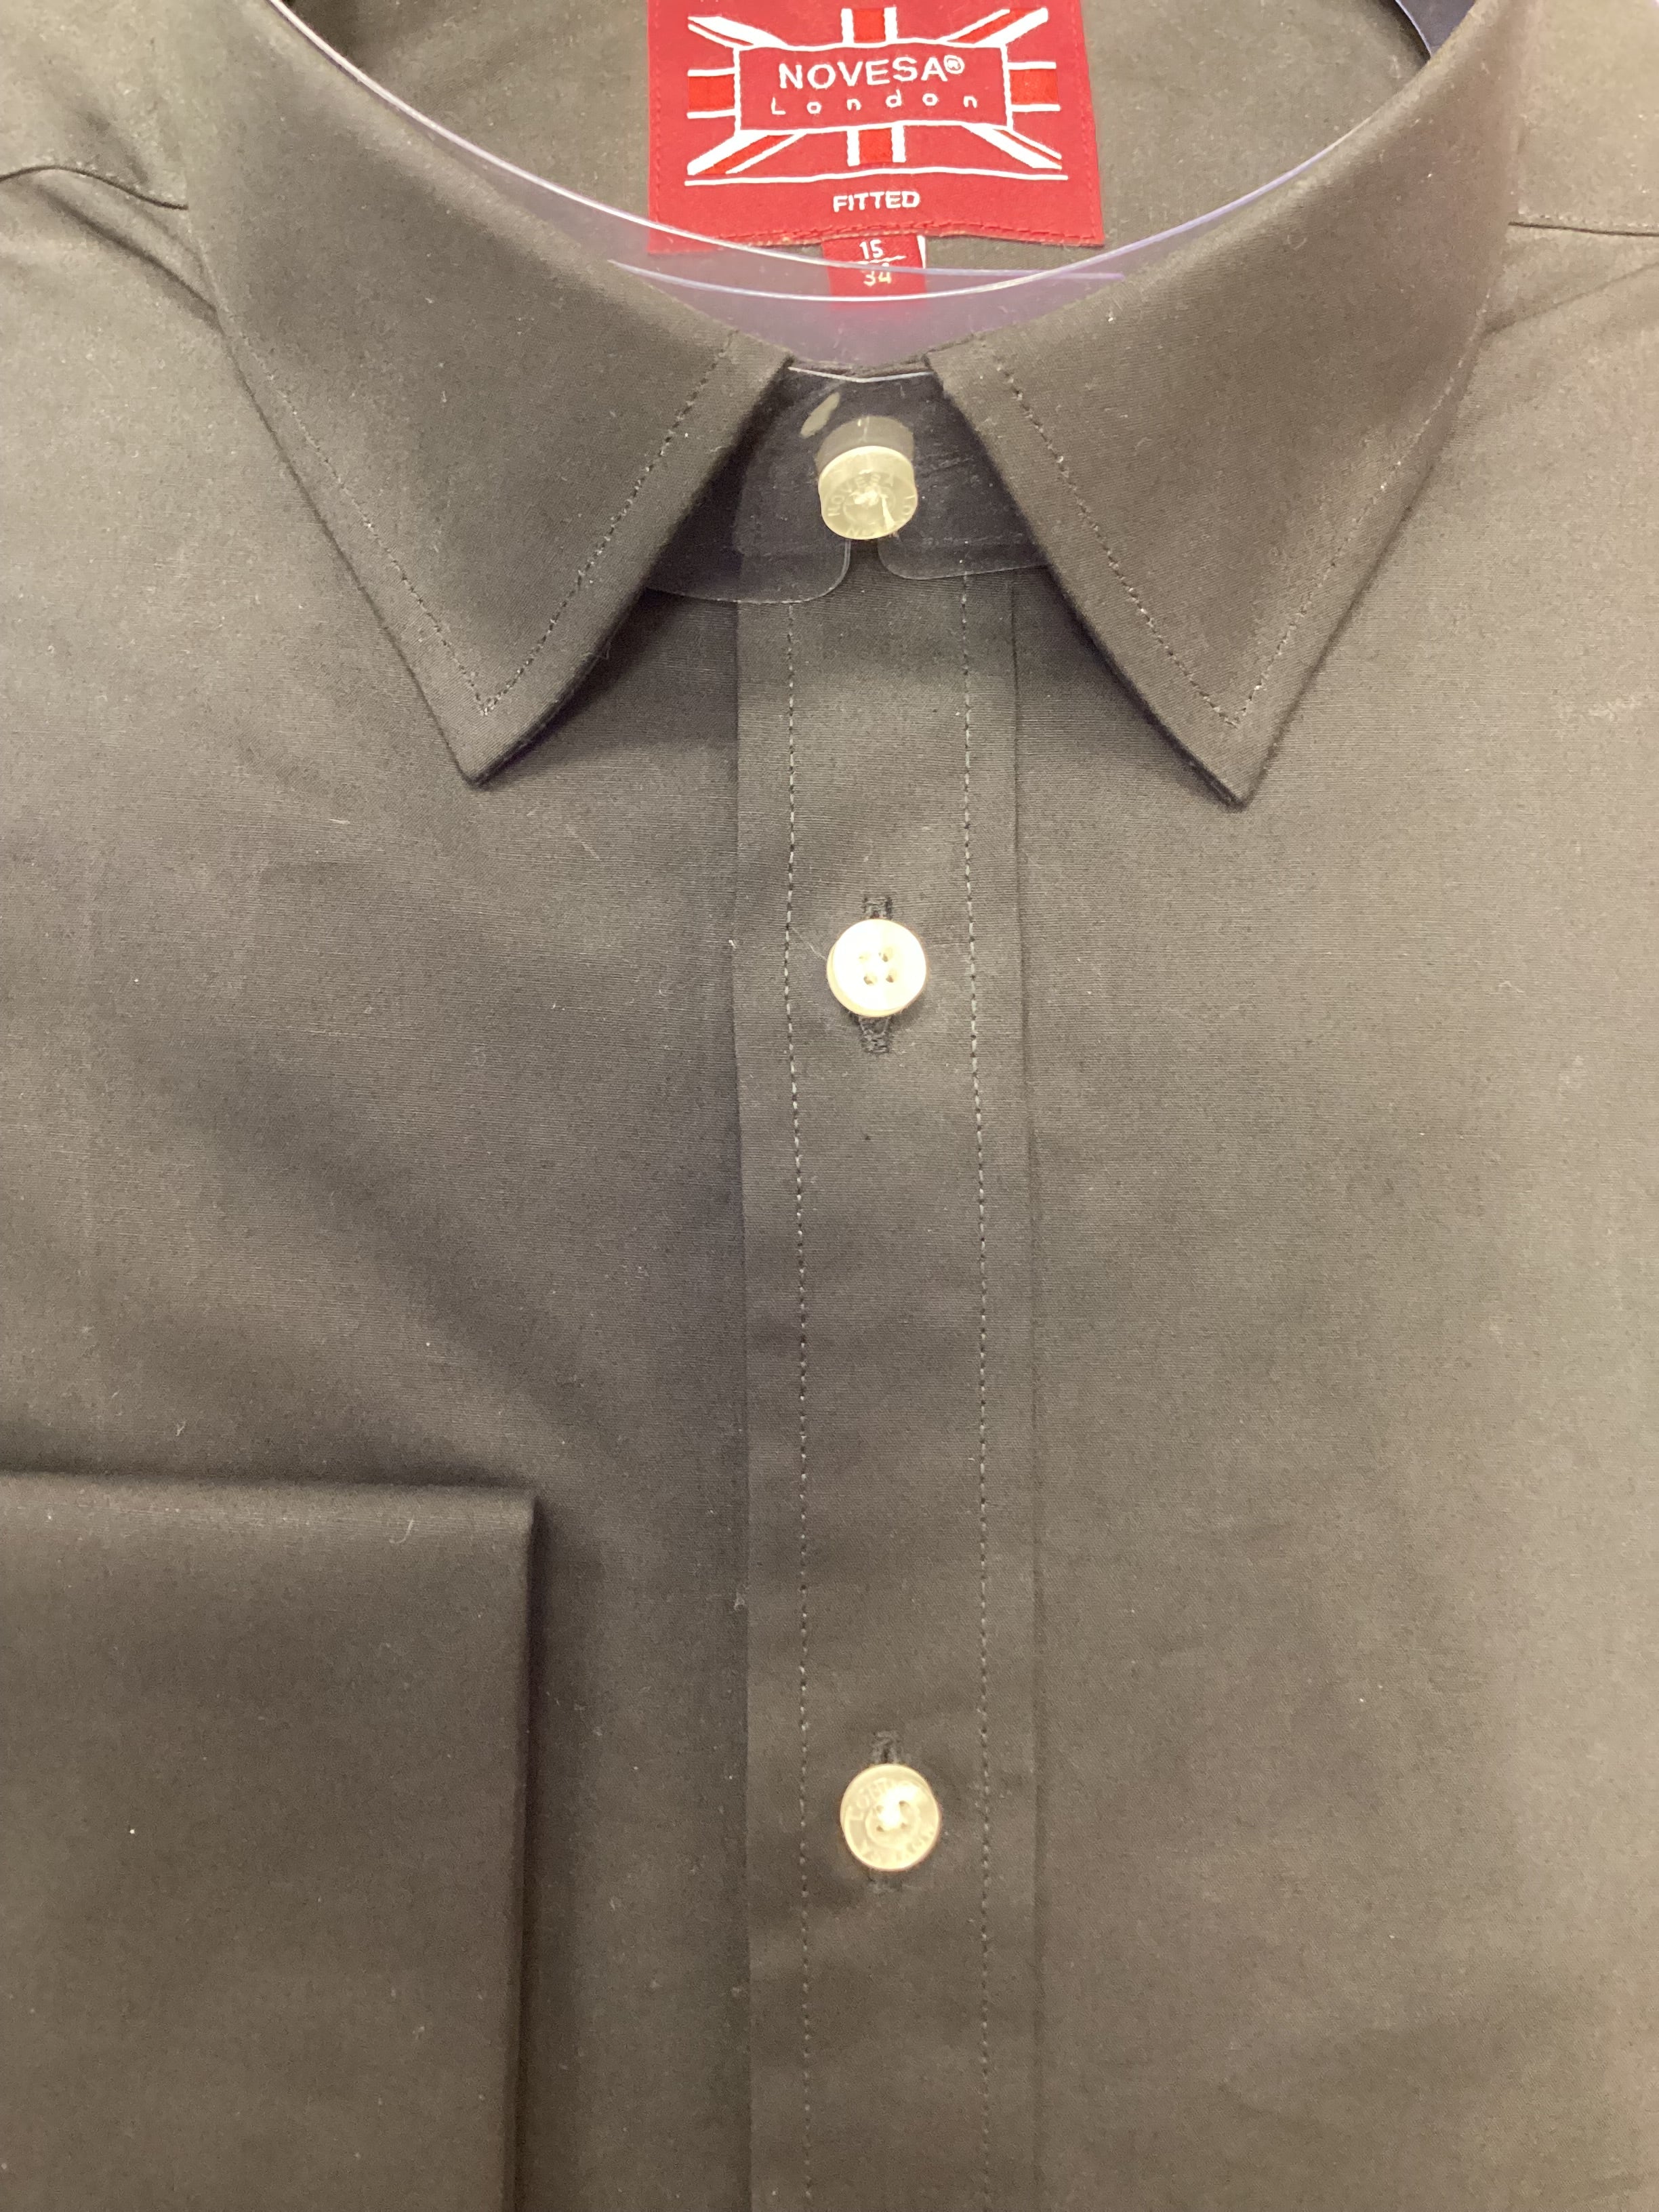 Plain Black Shirt with White Buttons